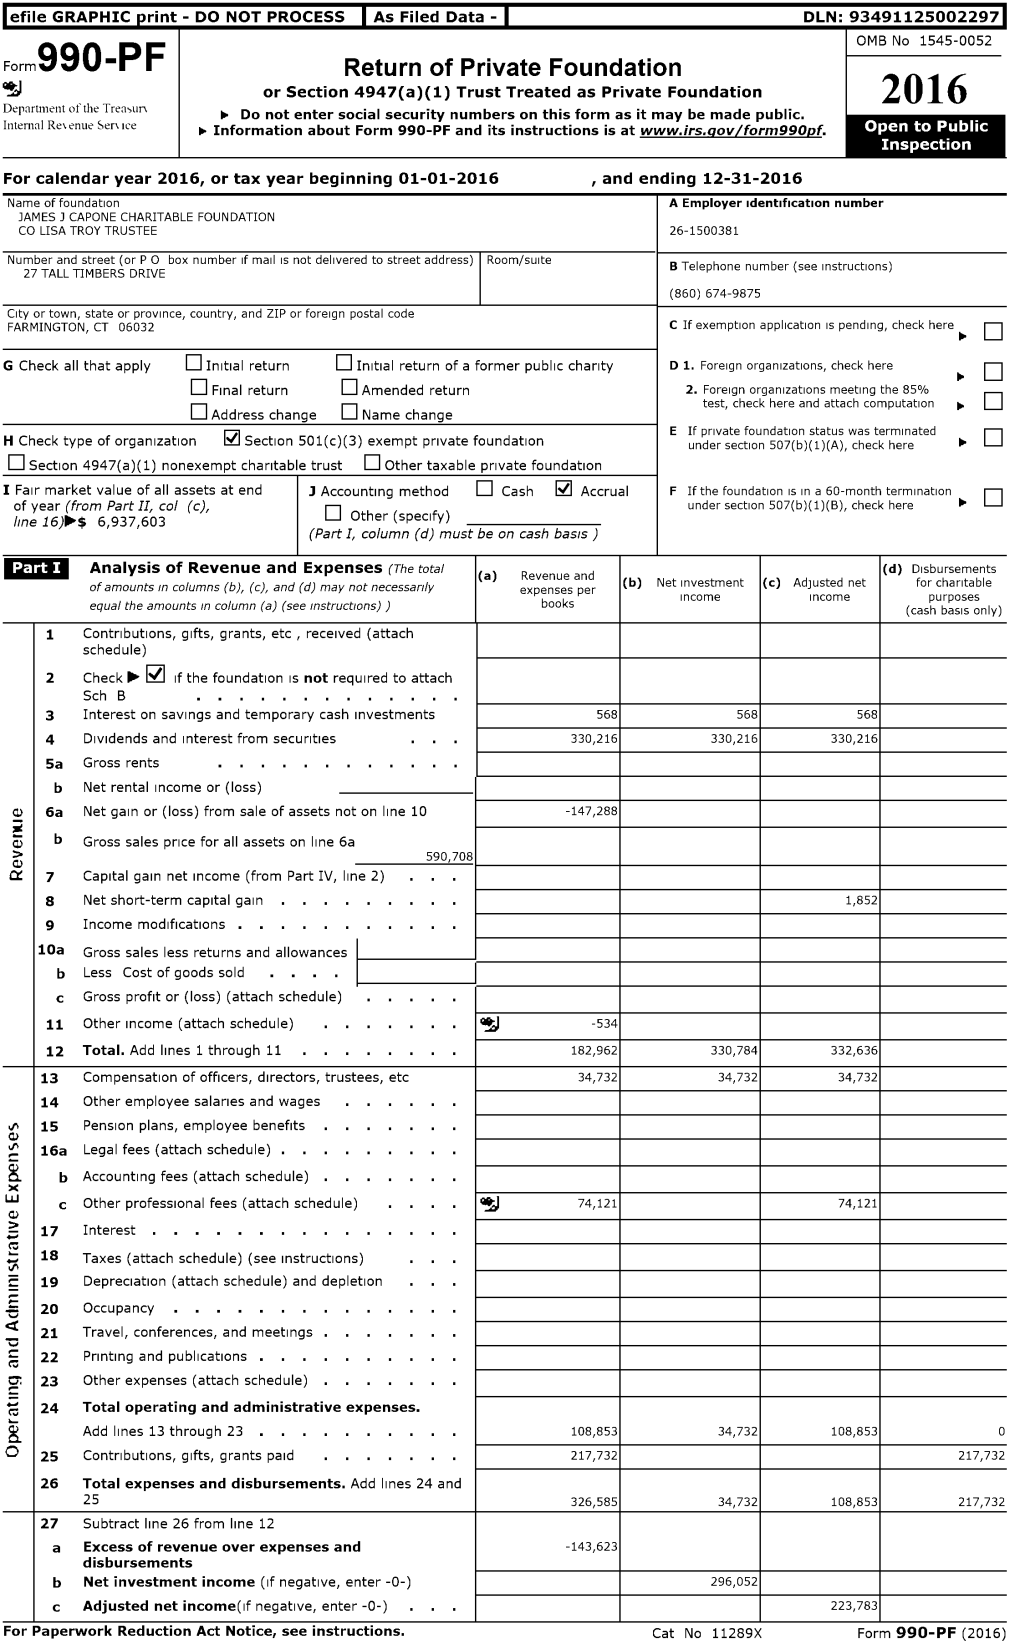 2016 Department of the Trea^Un Do Not Enter Social Security Numbers on This Form As It May Be Made Public